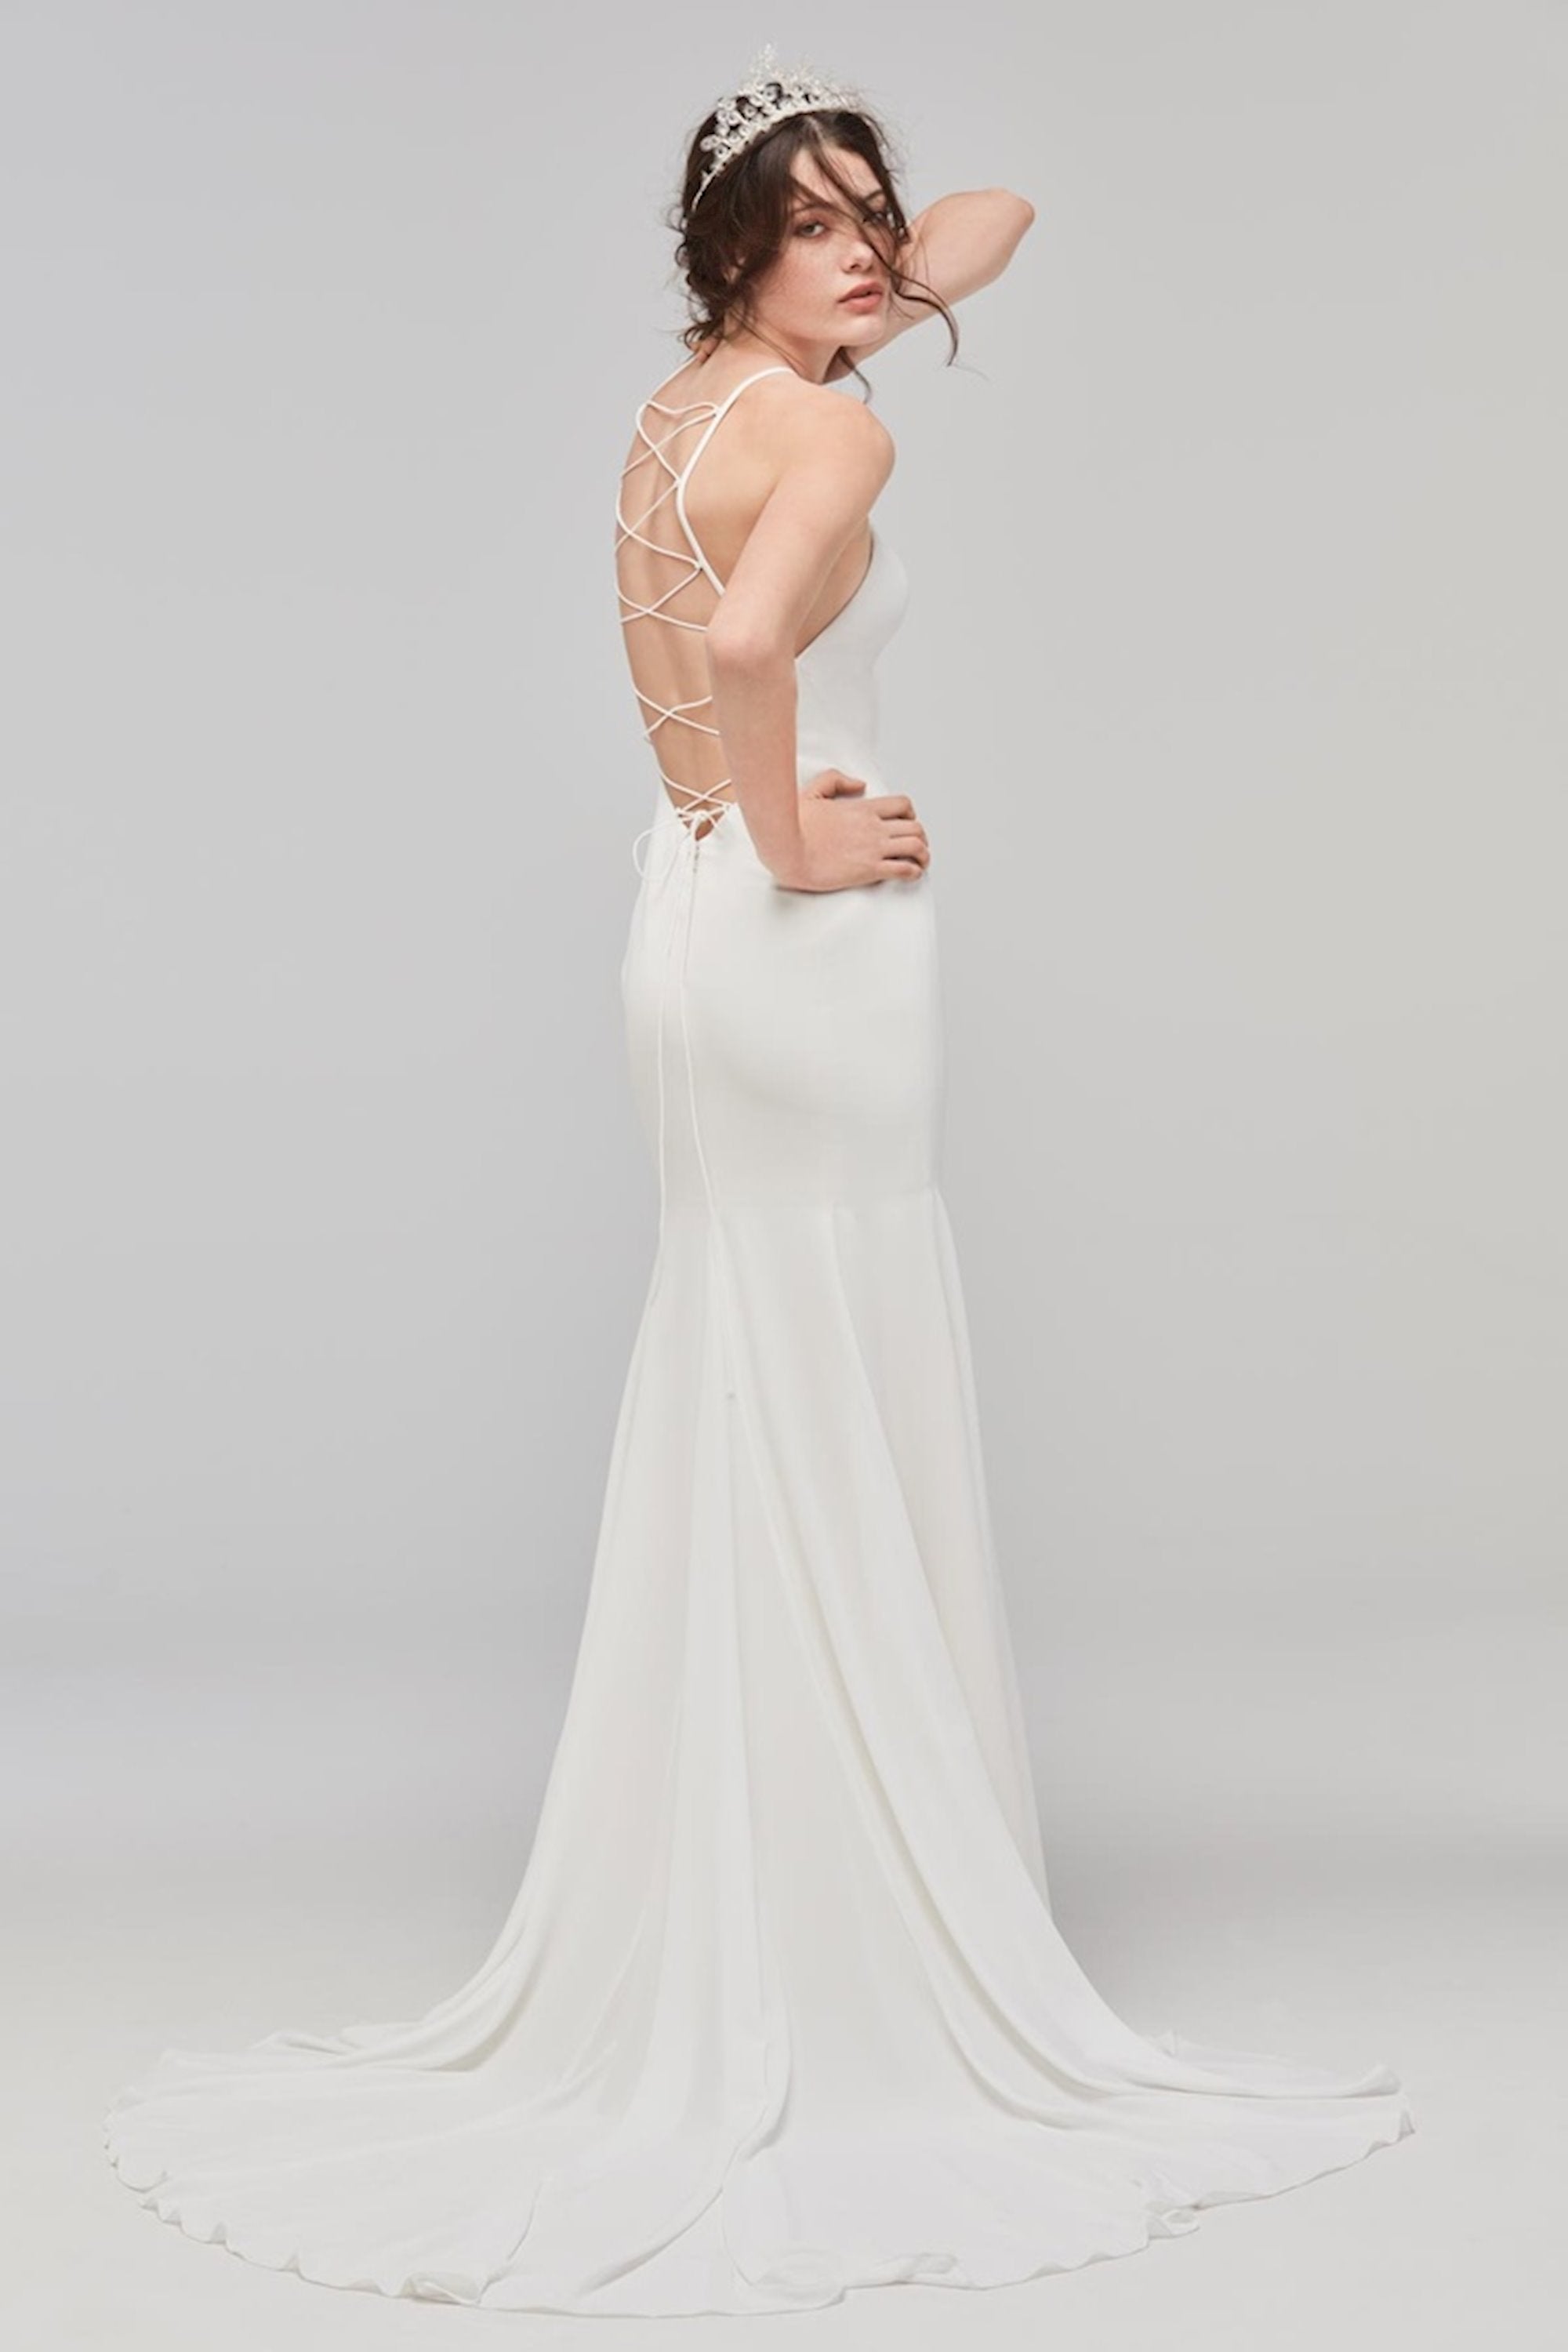 Willowby by Watters - Knox 59310 Sample Gown